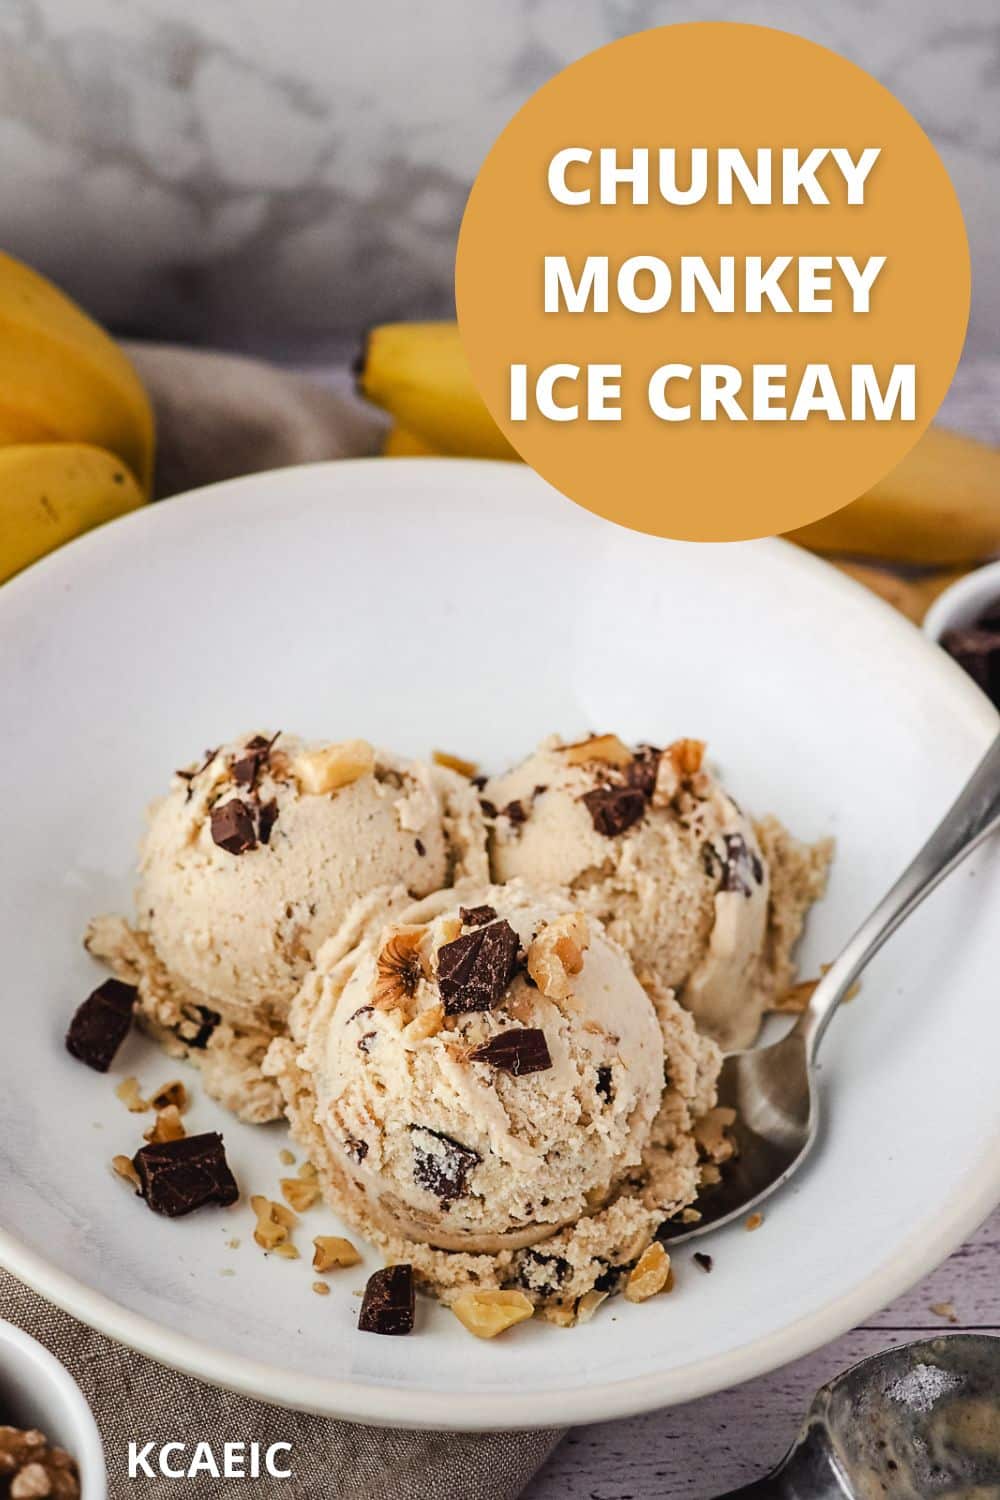 Three scoops of ice cream in a bowl garnished with walnuts and chocolate chunks with a spoon on the side, and text overlay chunky monkey ice cream.